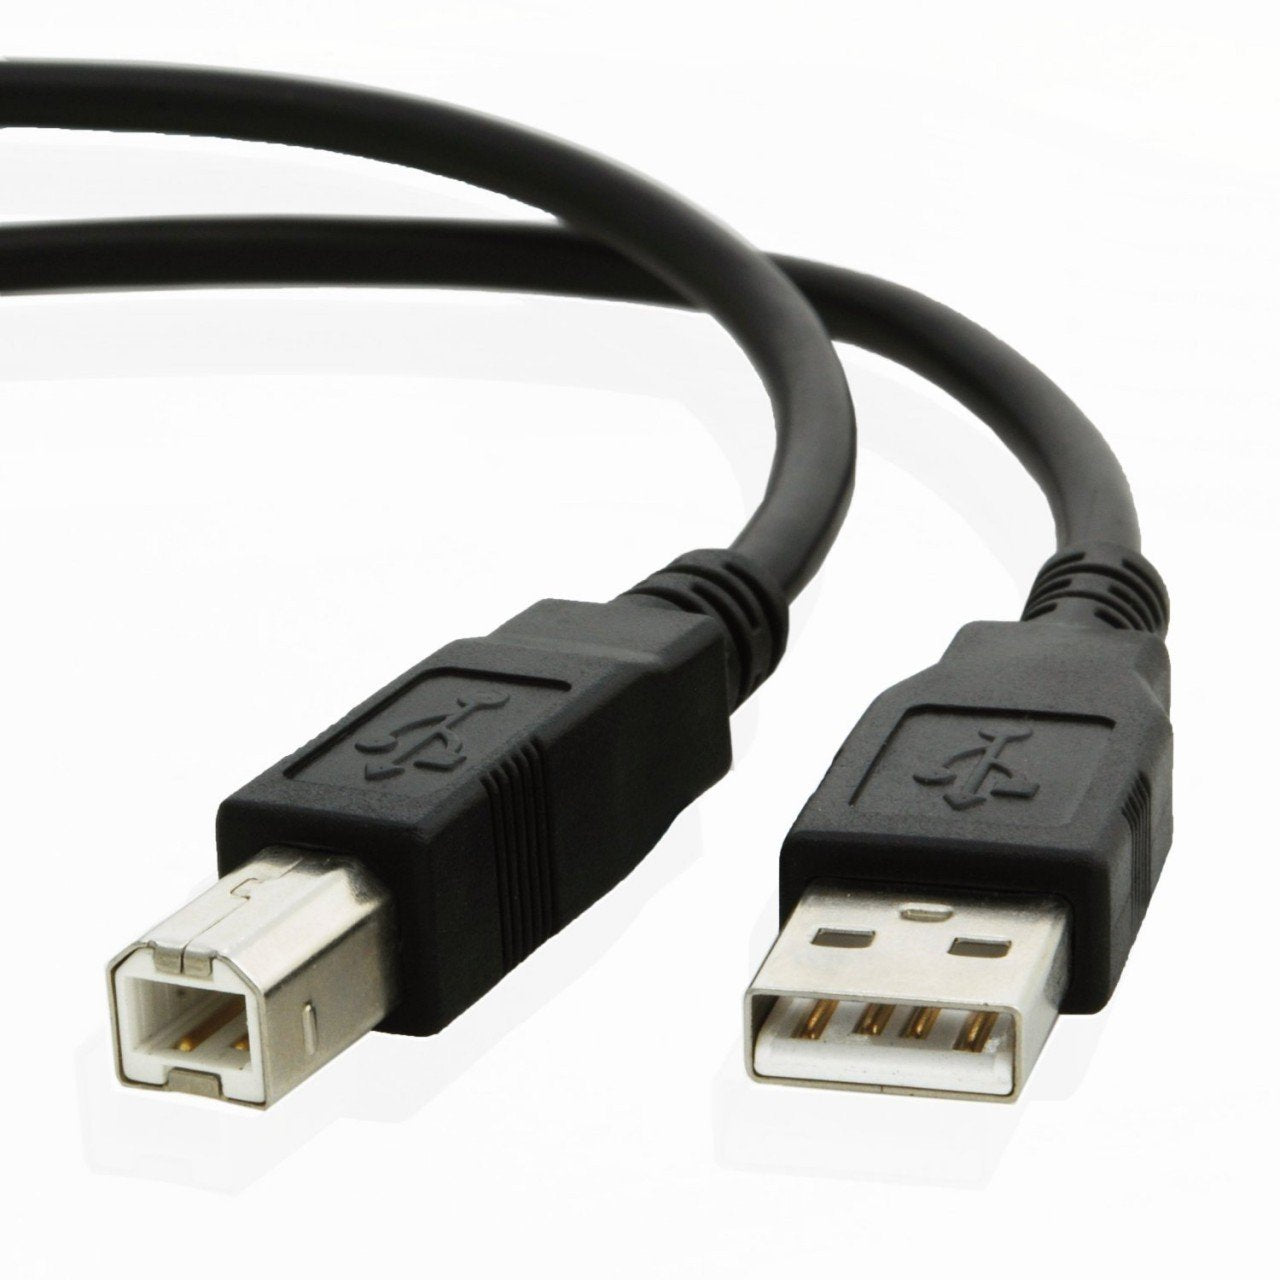 USB cable for Dell S2825cdn